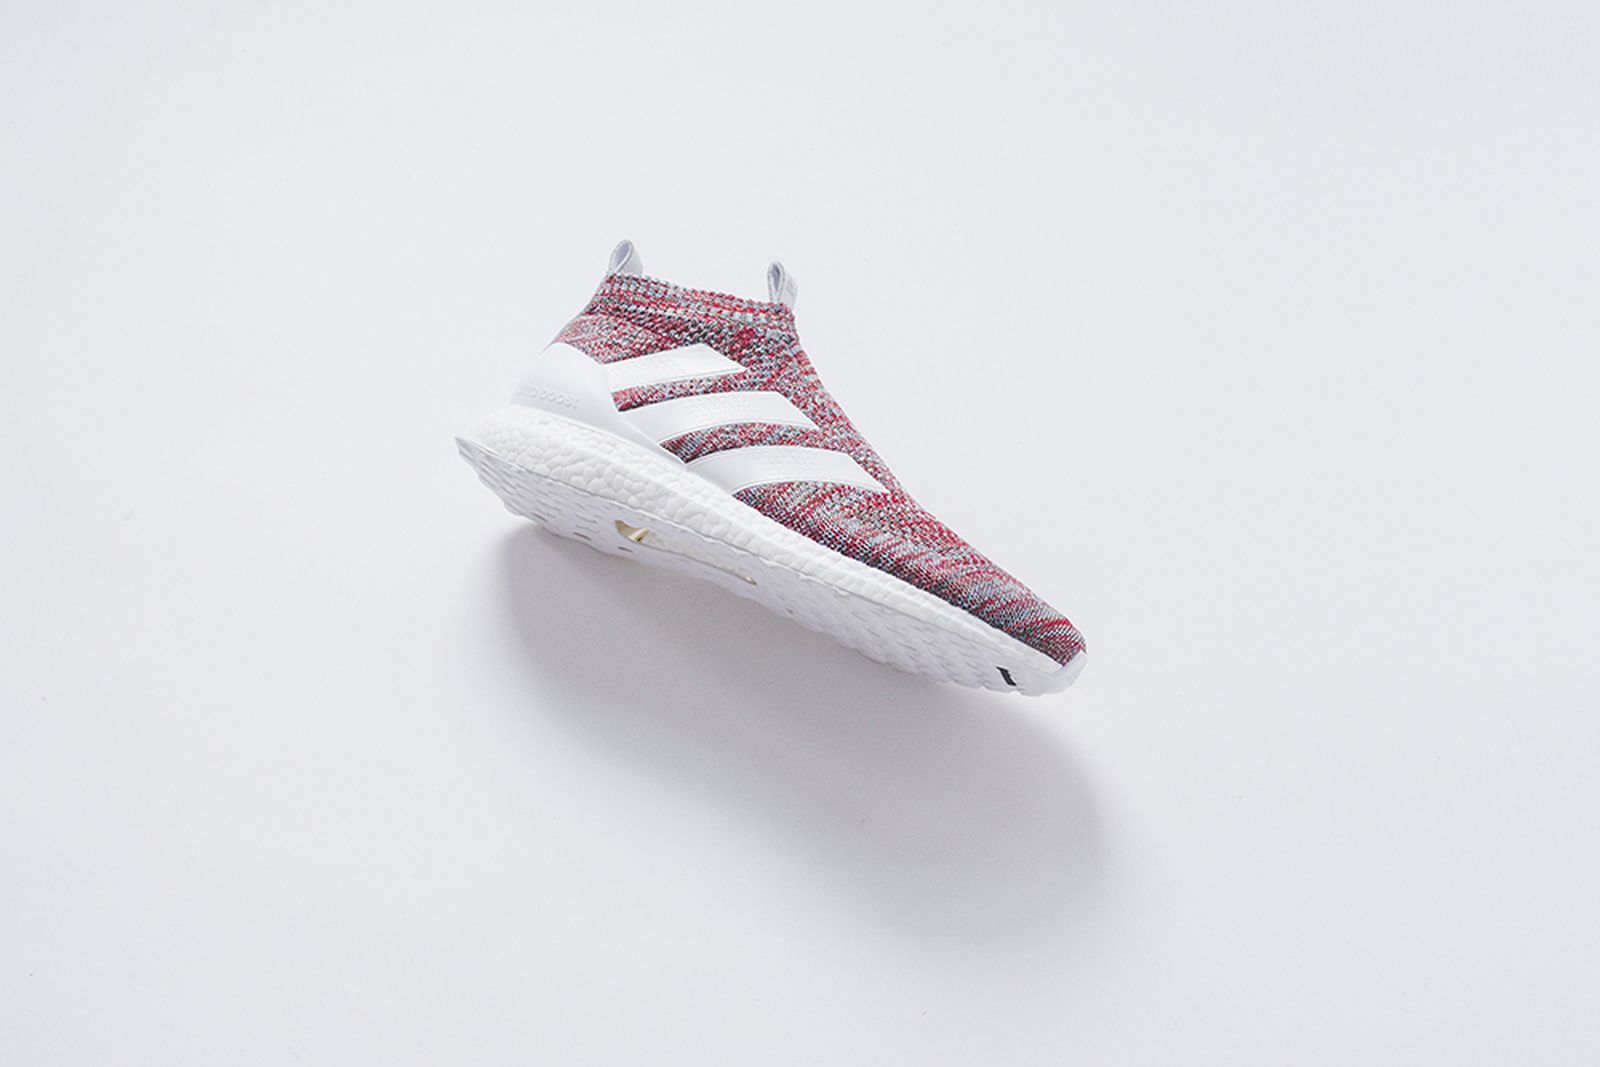 kith adidas soccer sneakers release date price ronnie fieg